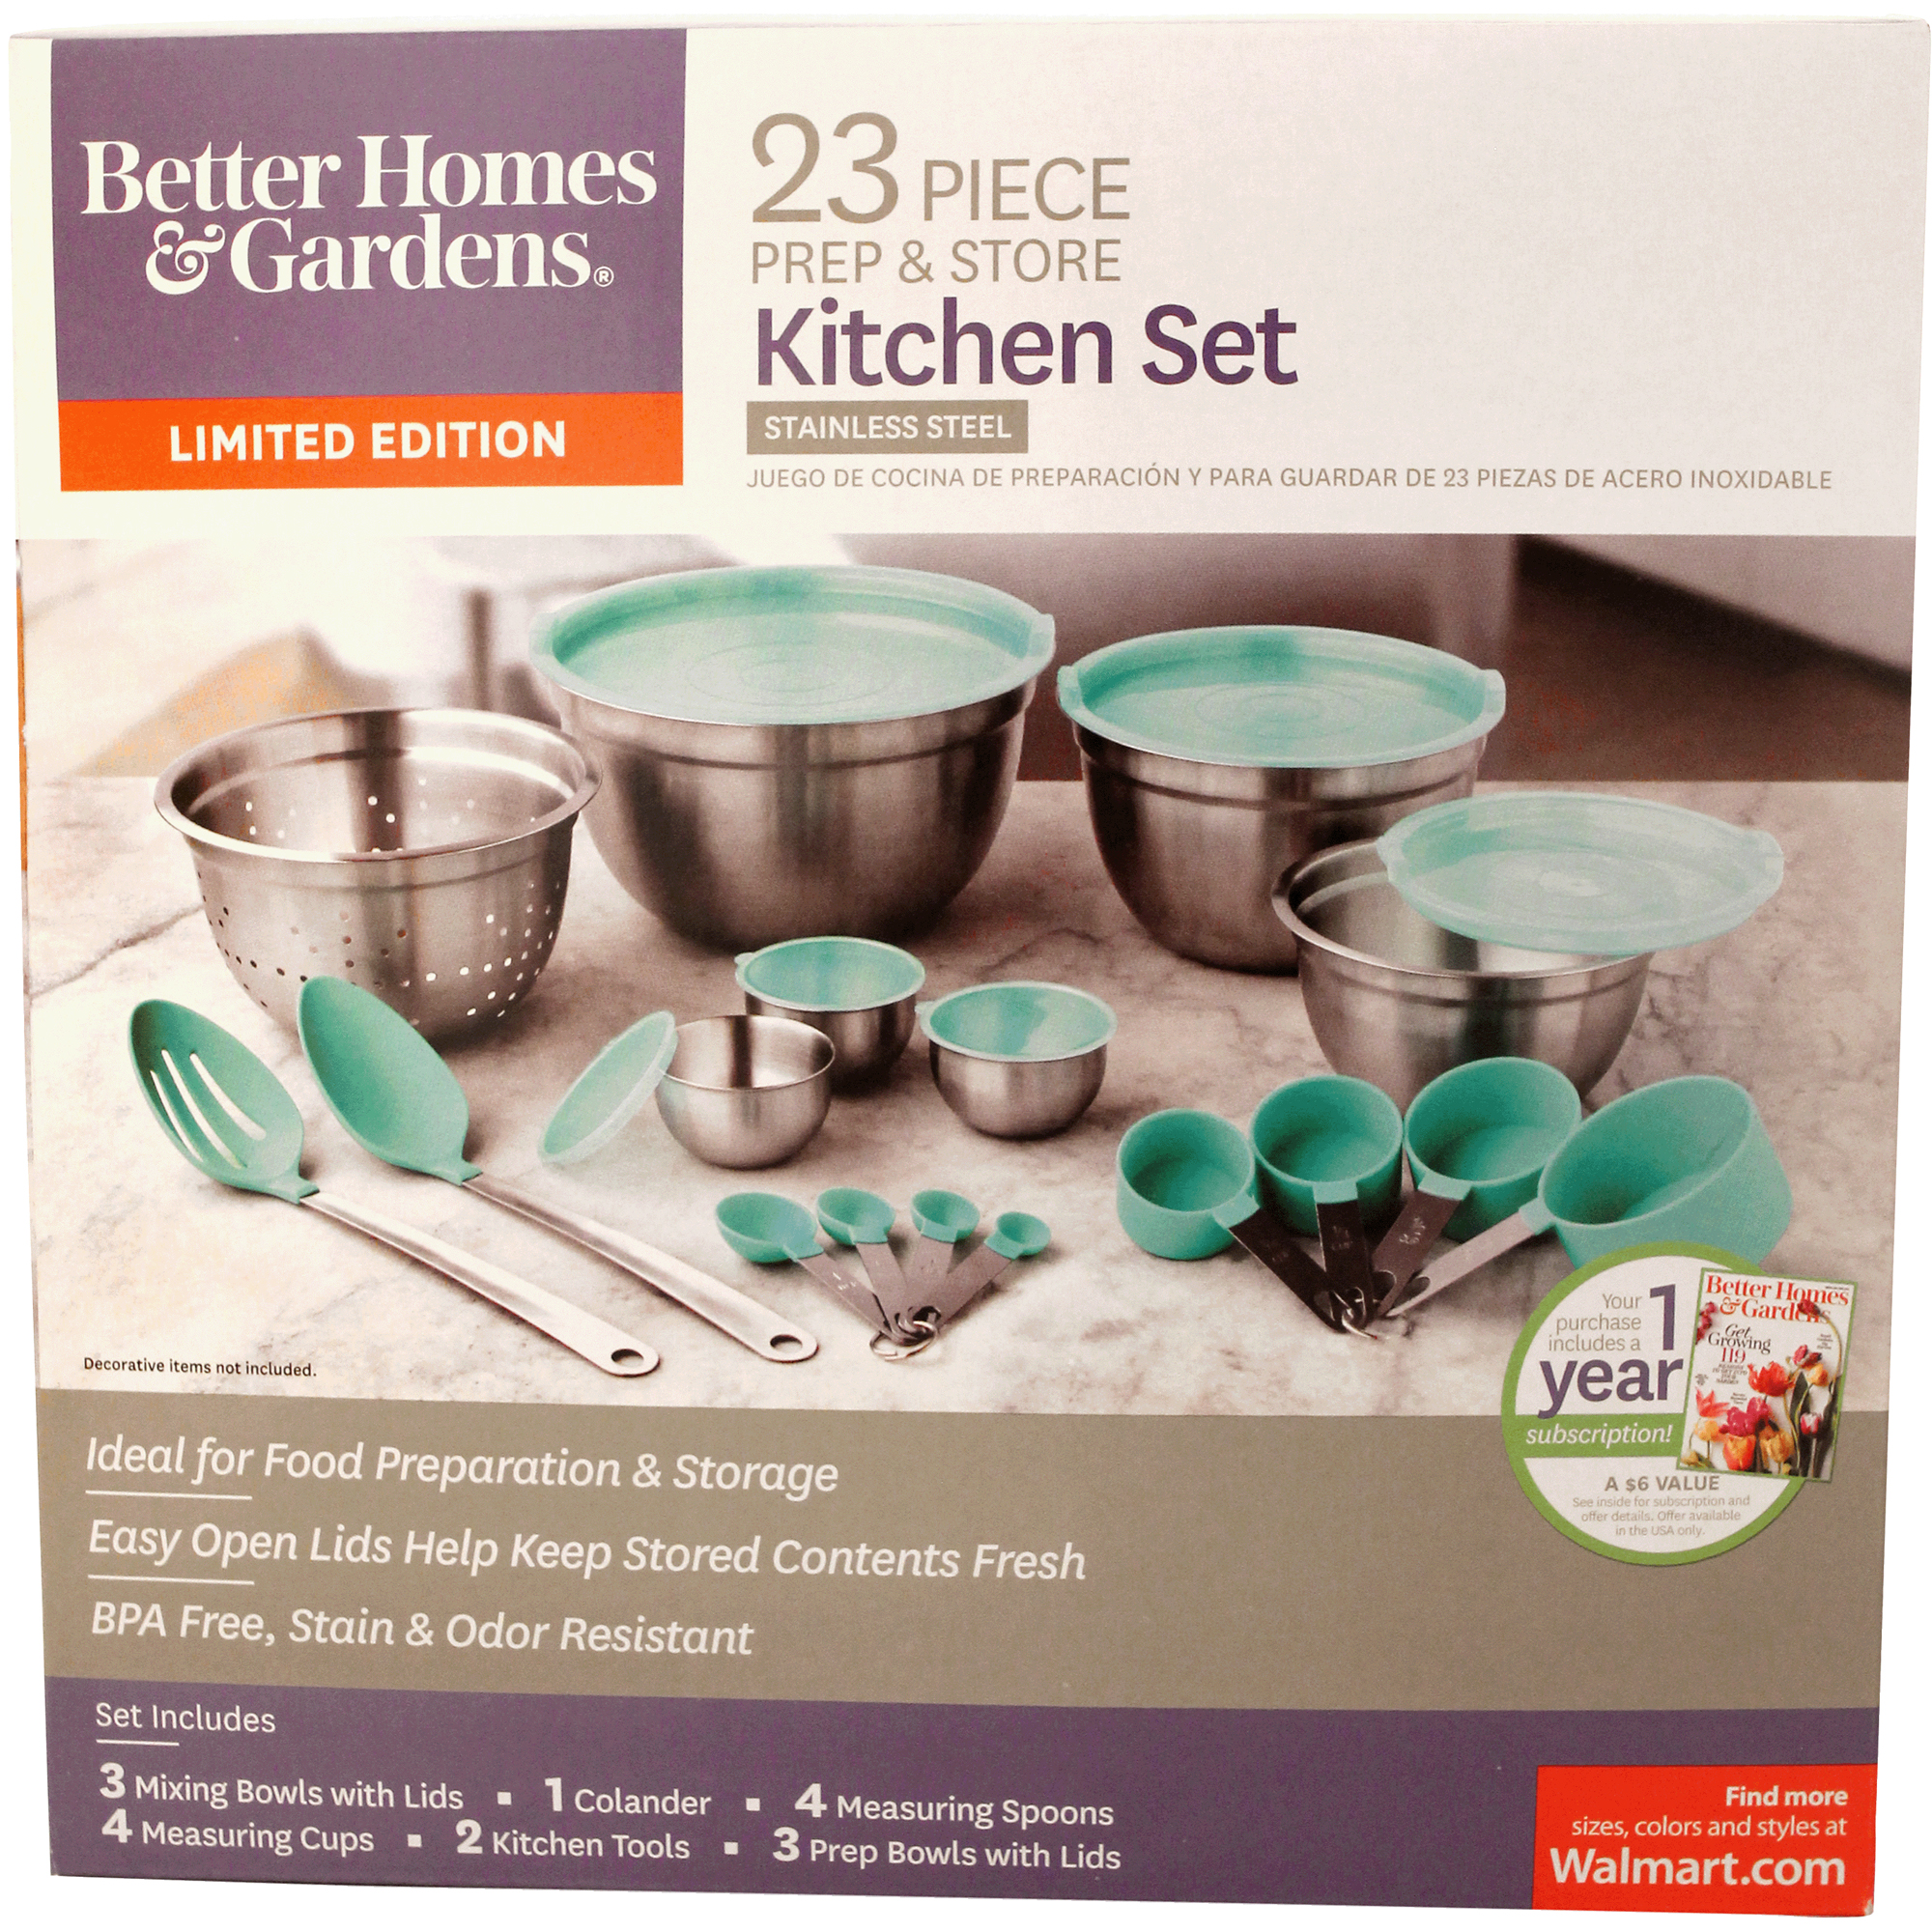 Better Homes & Gardens Teal Gadget and Utensil Set, 23 Piece - image 3 of 7